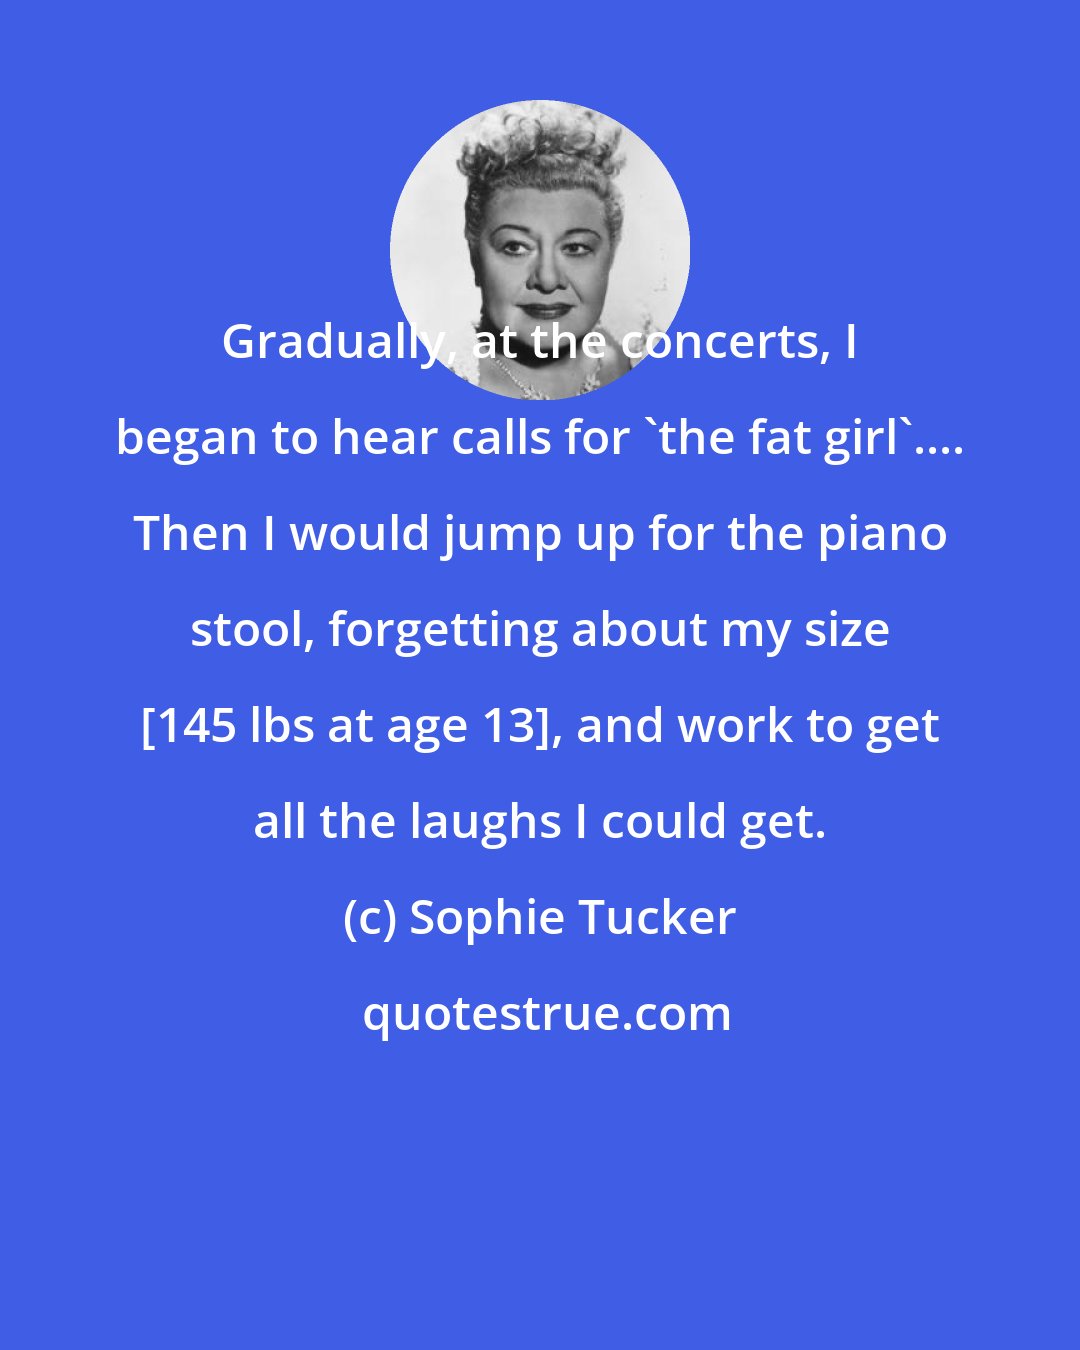 Sophie Tucker: Gradually, at the concerts, I began to hear calls for 'the fat girl'.... Then I would jump up for the piano stool, forgetting about my size [145 lbs at age 13], and work to get all the laughs I could get.